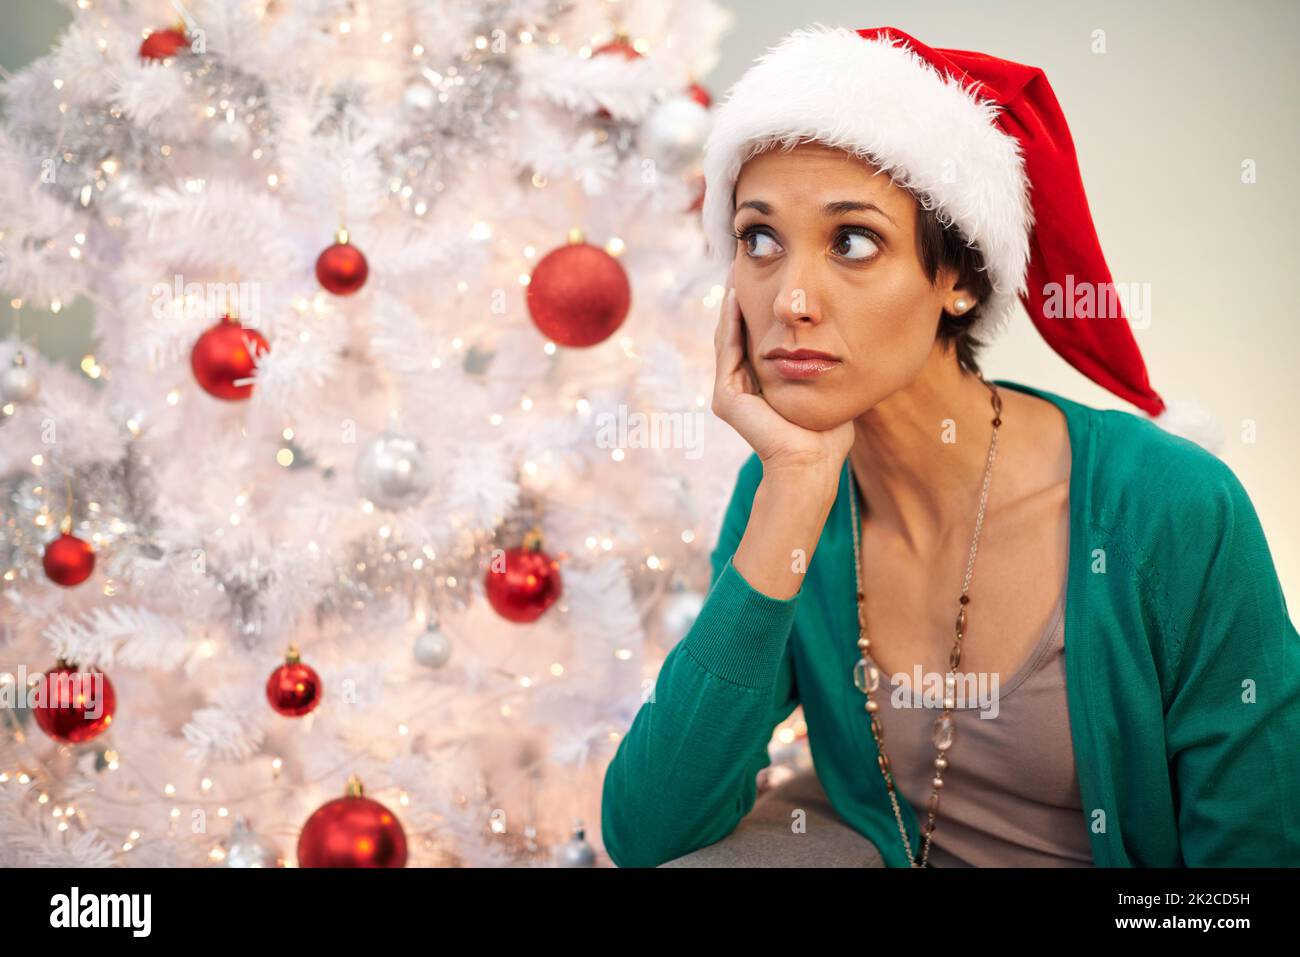 Whens santa going to arrive. Shot of a young woman looking displeased at Christmastime. Stock Photo